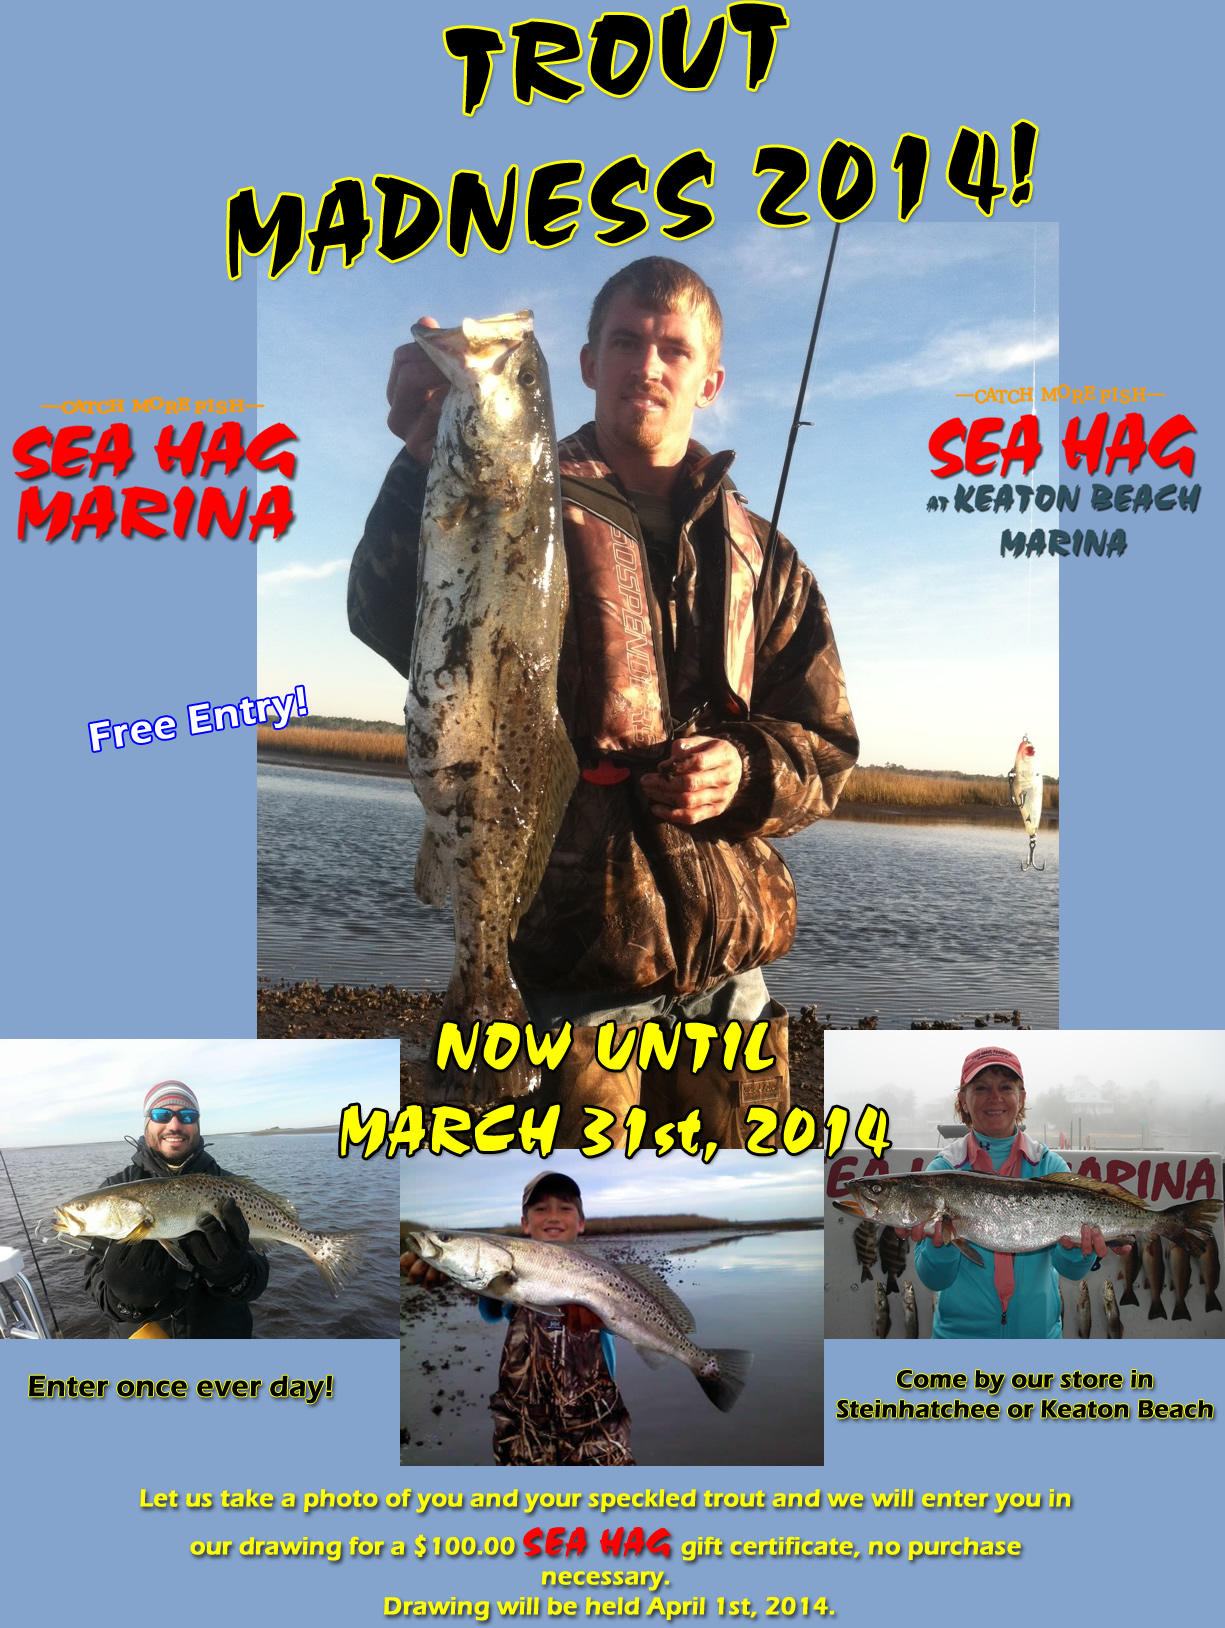 Trout madness 2014